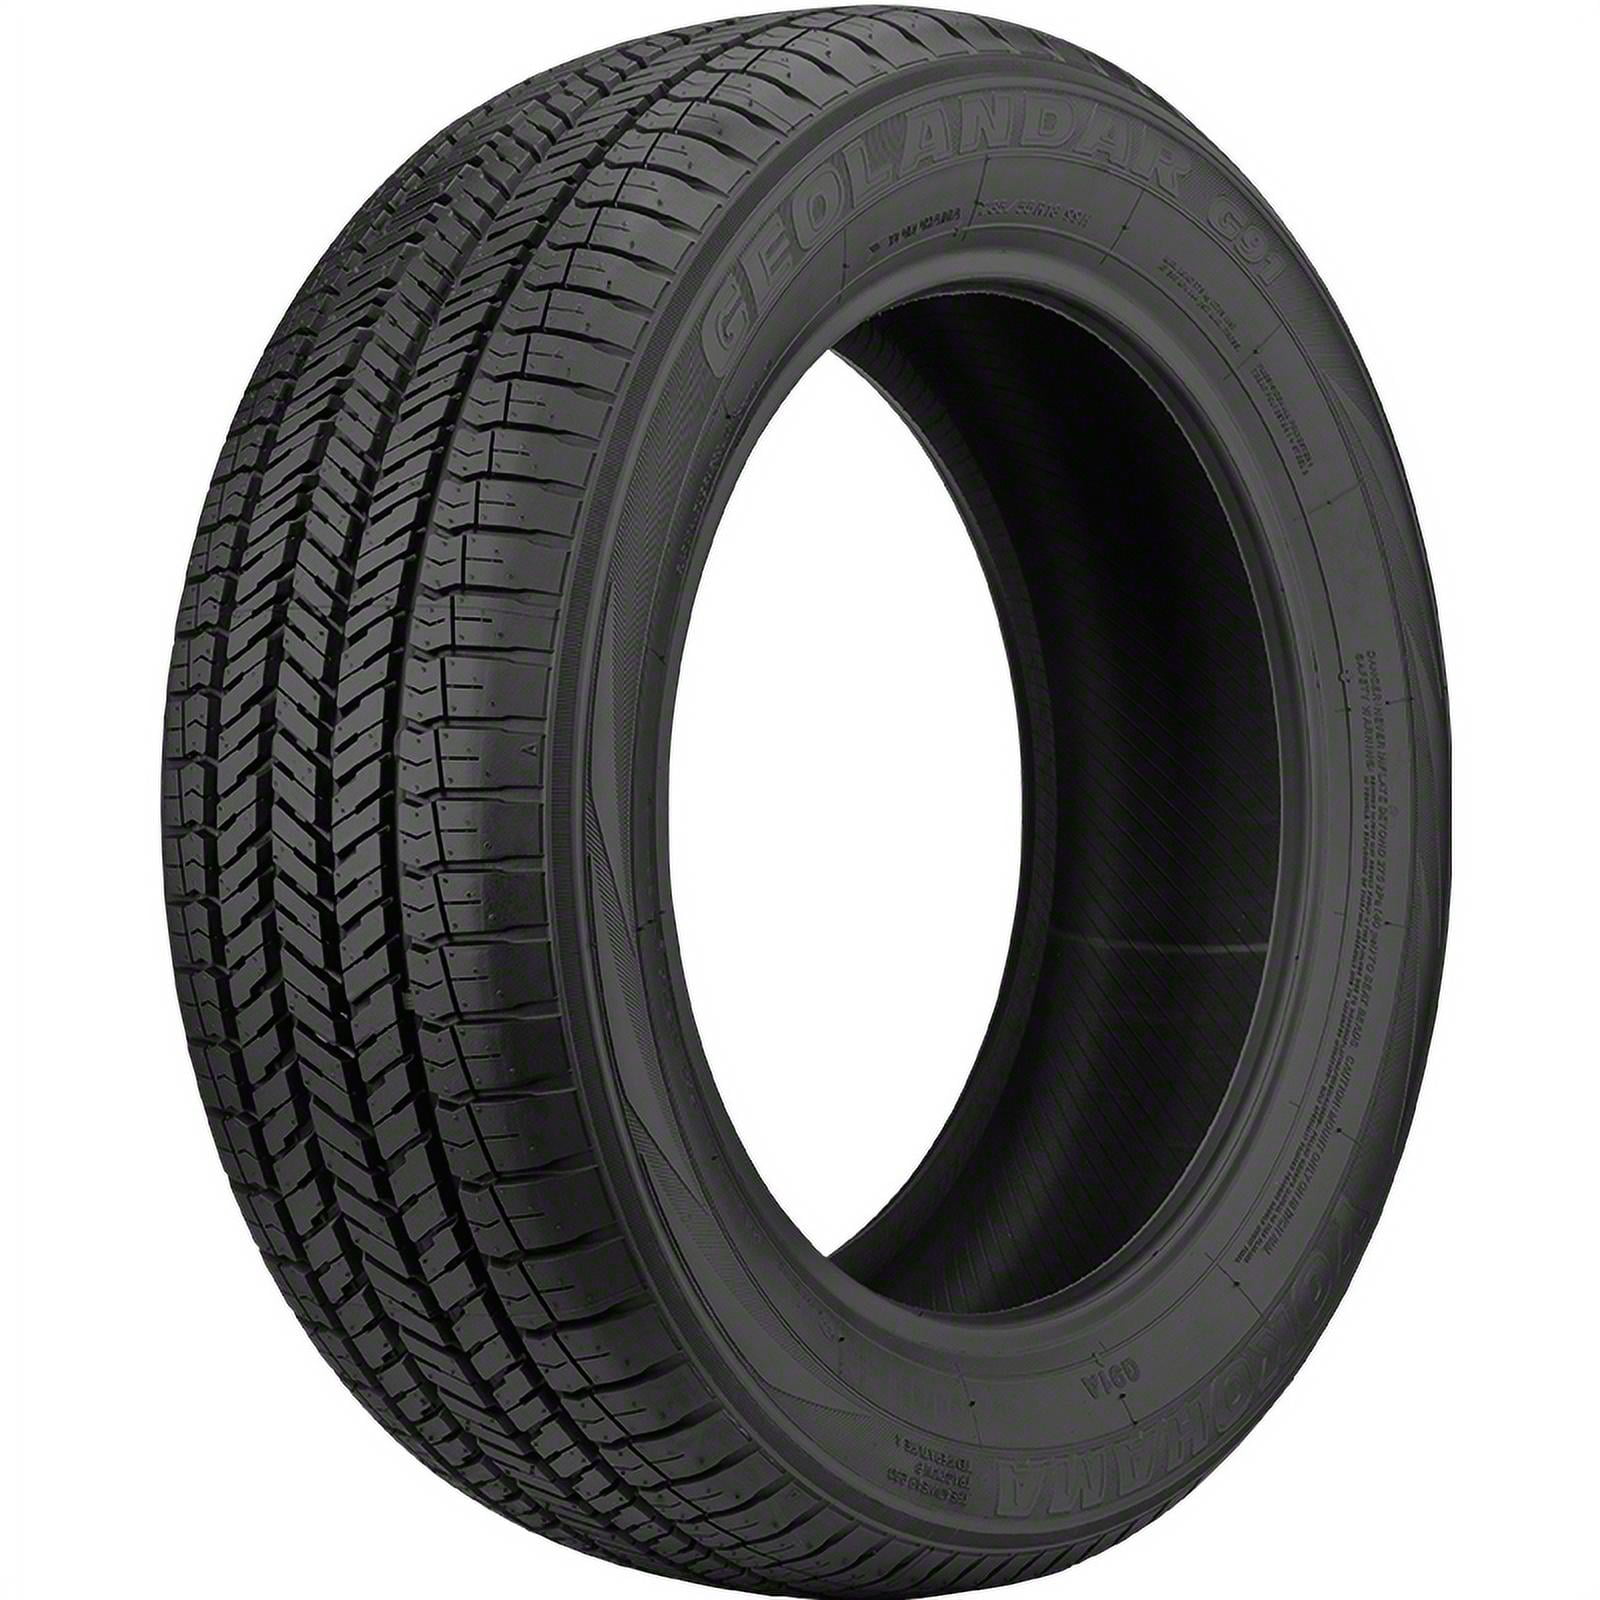 91 av. Yokohama g91av 225/65r17 102h. Yokohama g91av 225/65/17 102h. Yokohama Geolandar g91a. Шина Continental 4x4 contact 265/60 r18 110h.